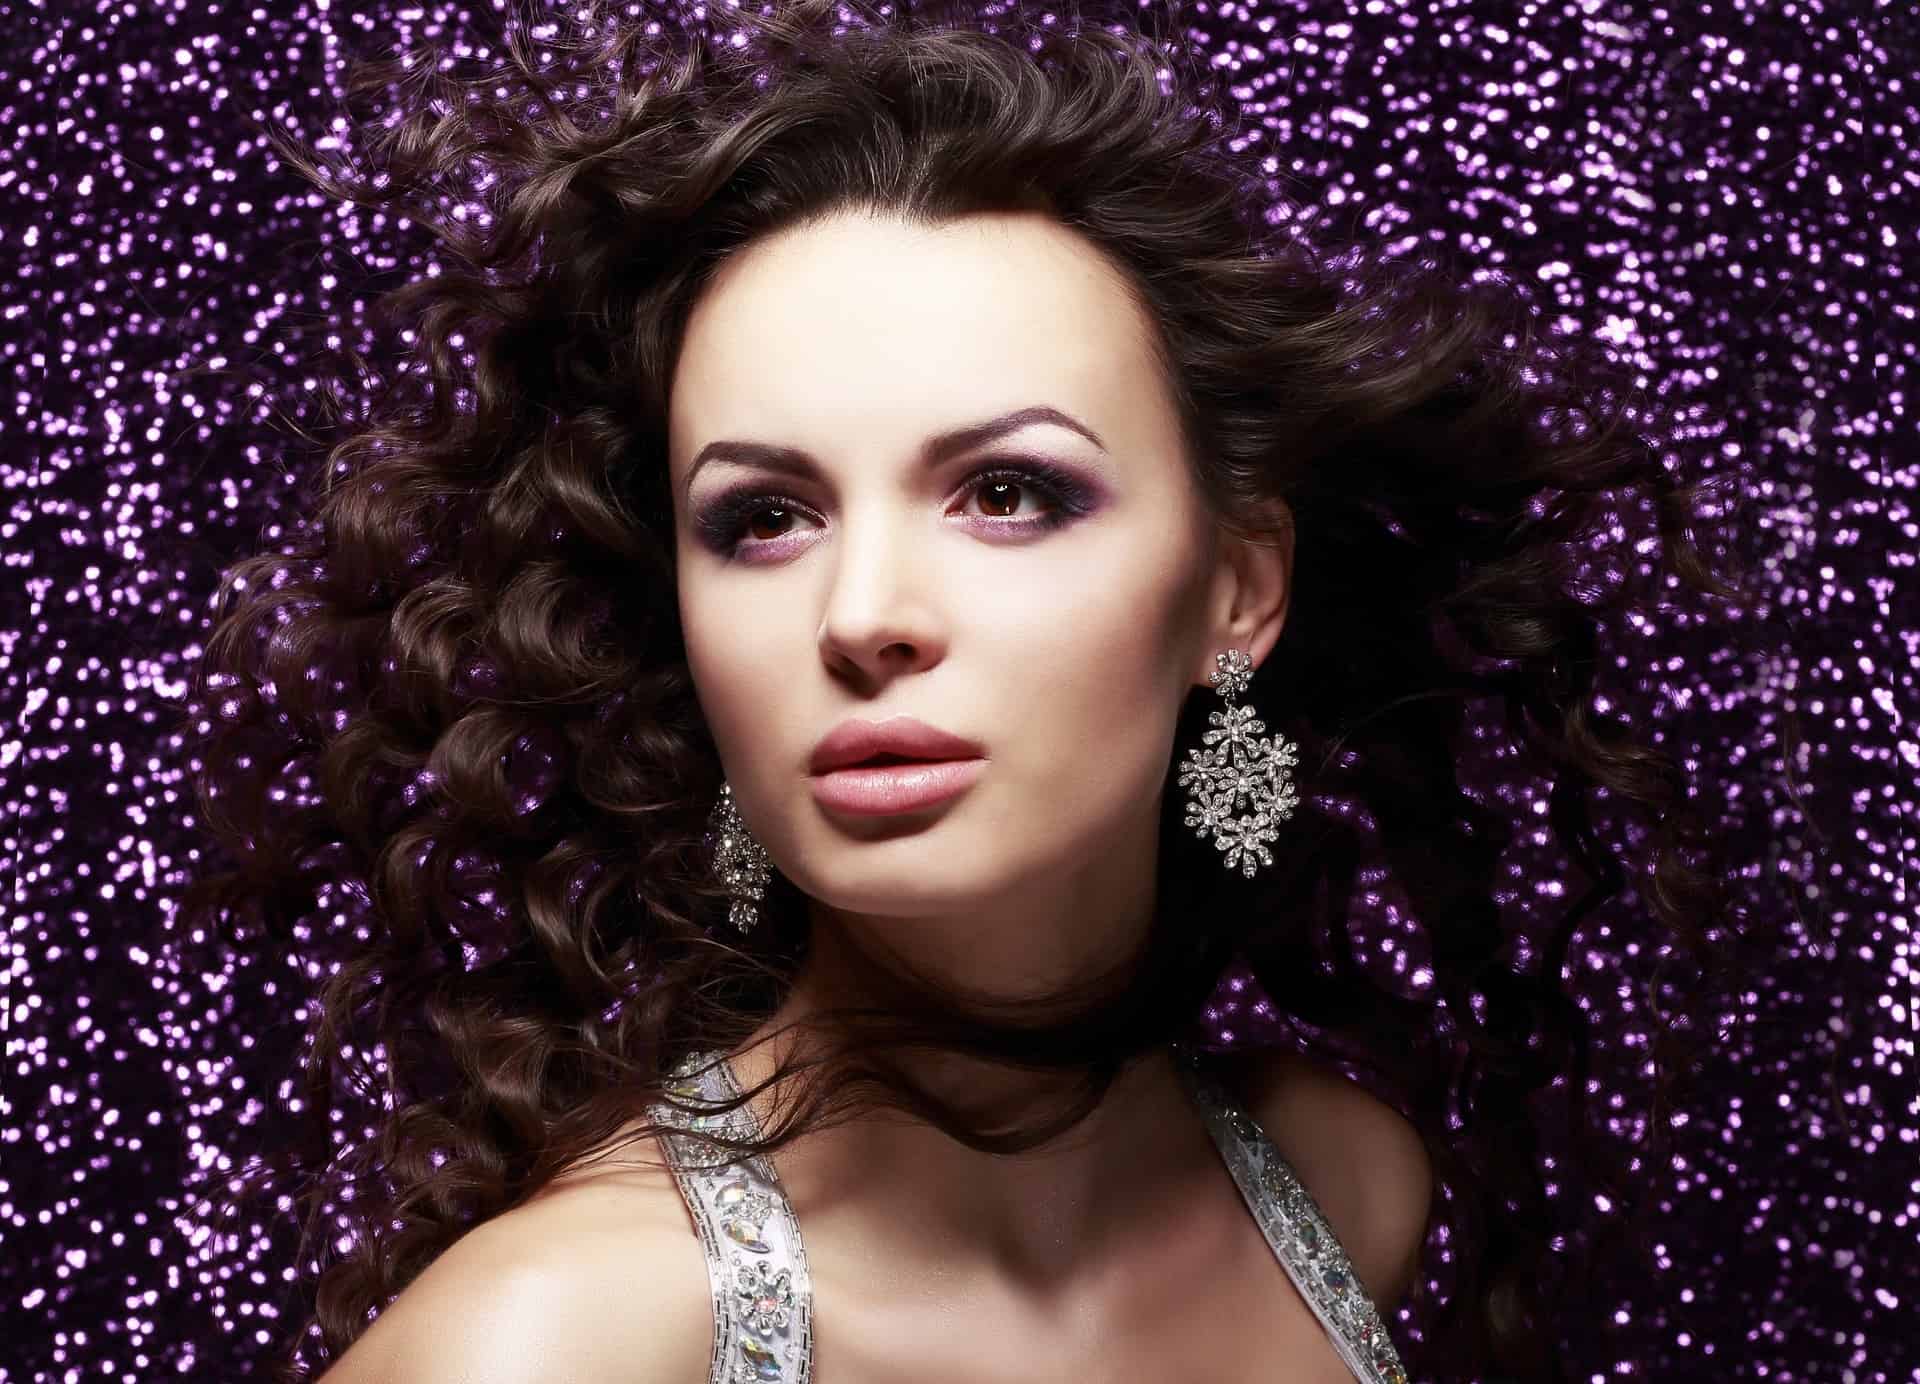 A Woman Modeling Earrings With Sparkly Background